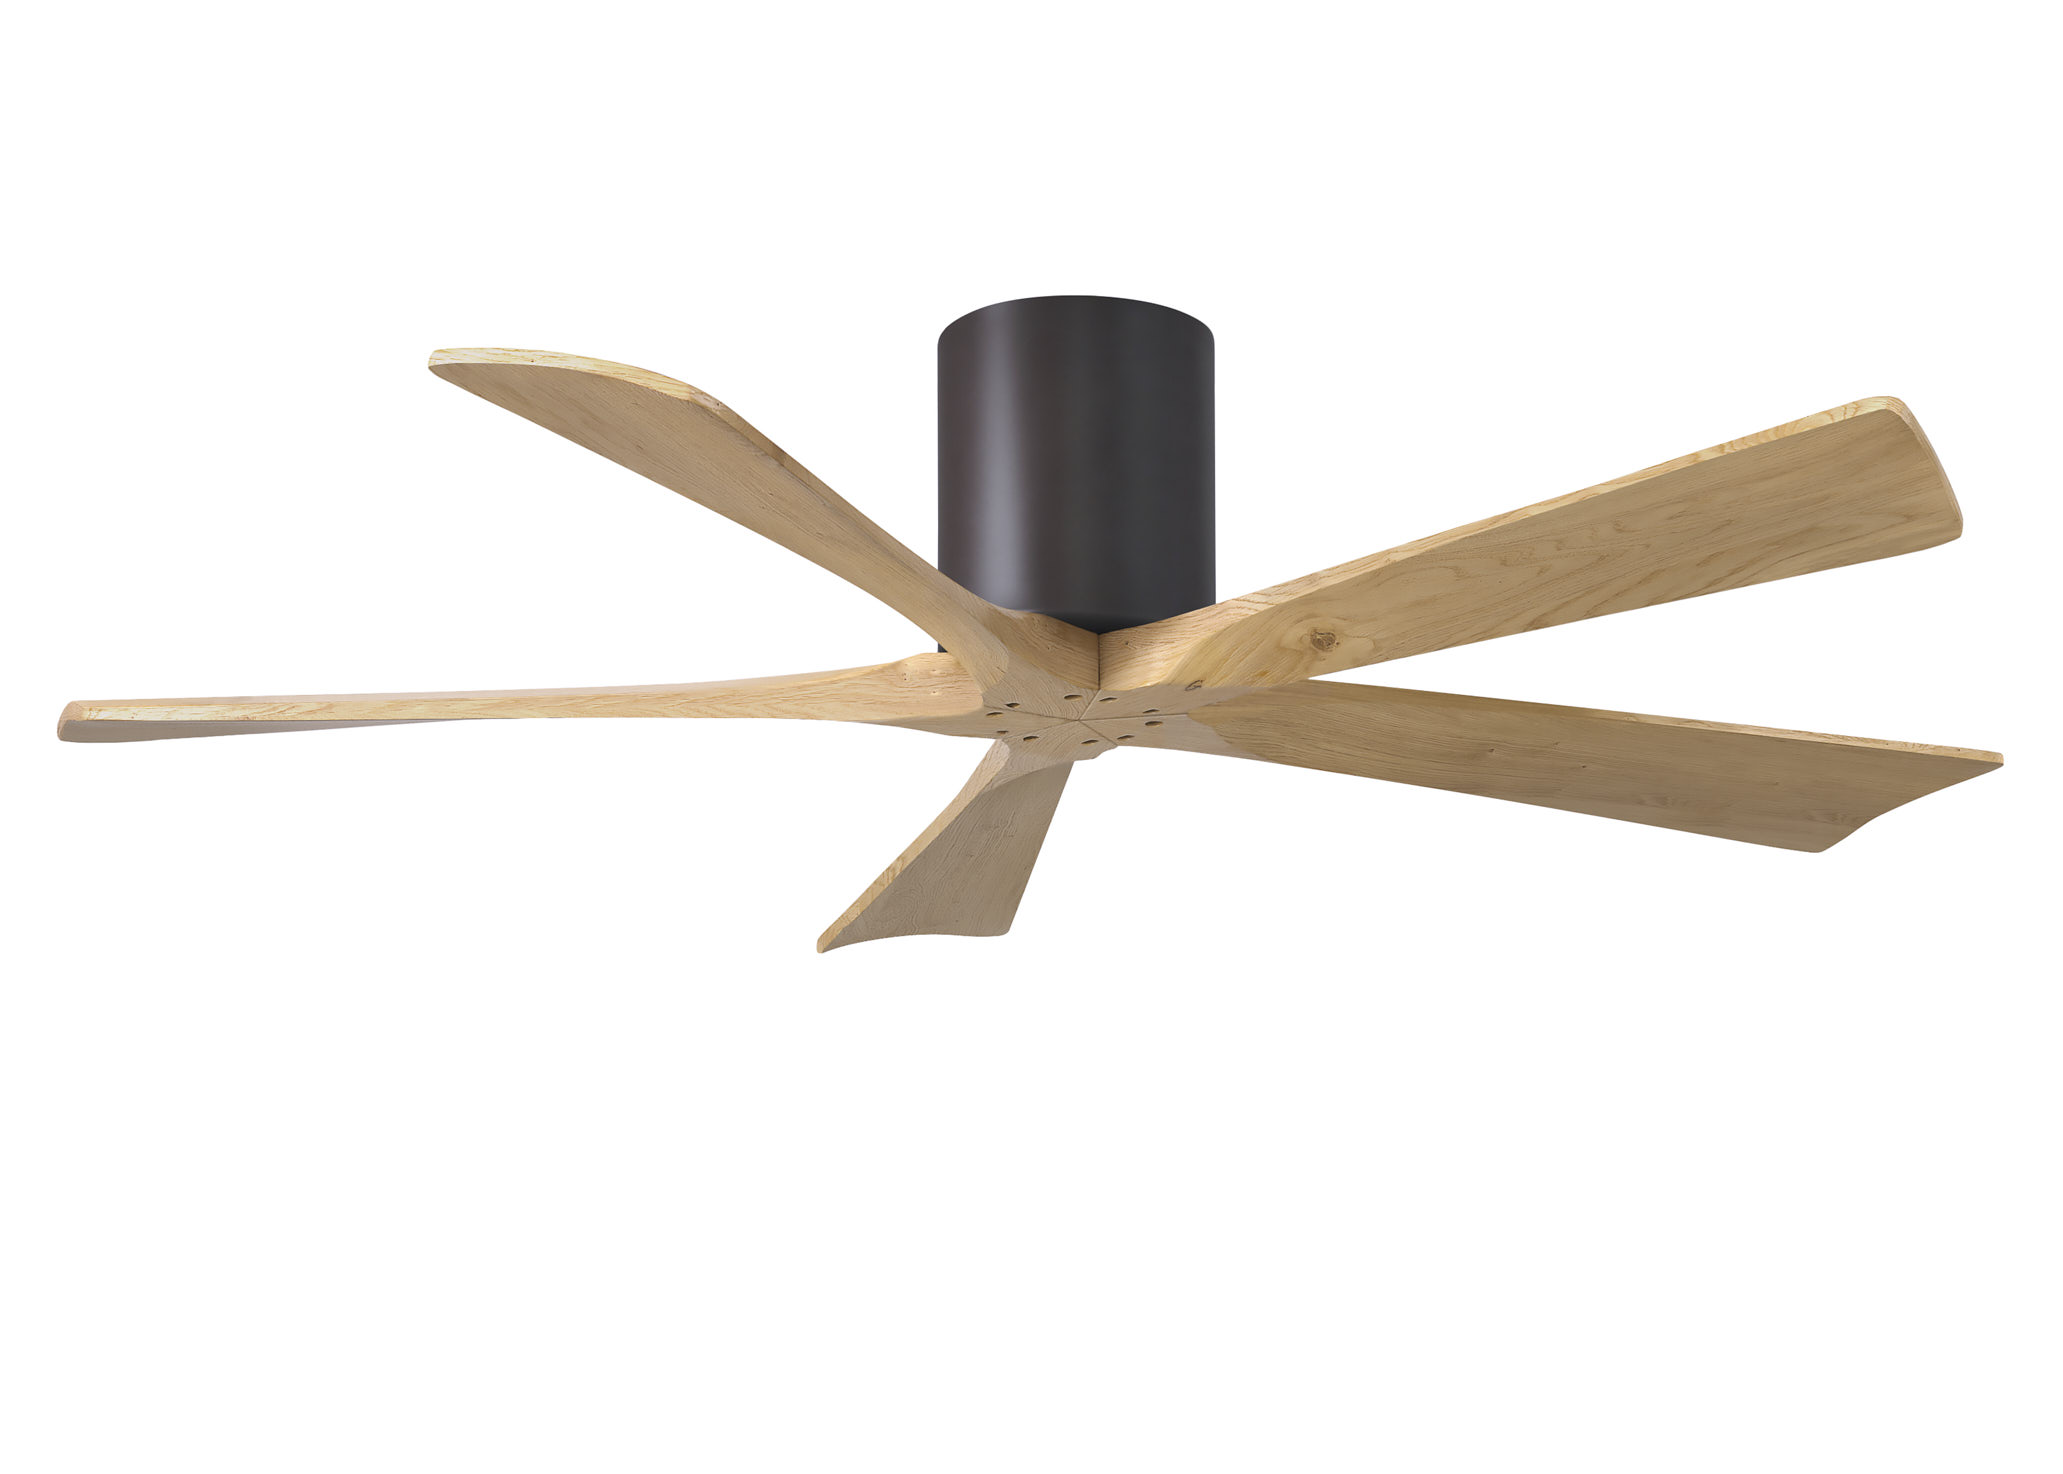 Irene-5H 6-speed ceiling fan in textured bronze finish with 52